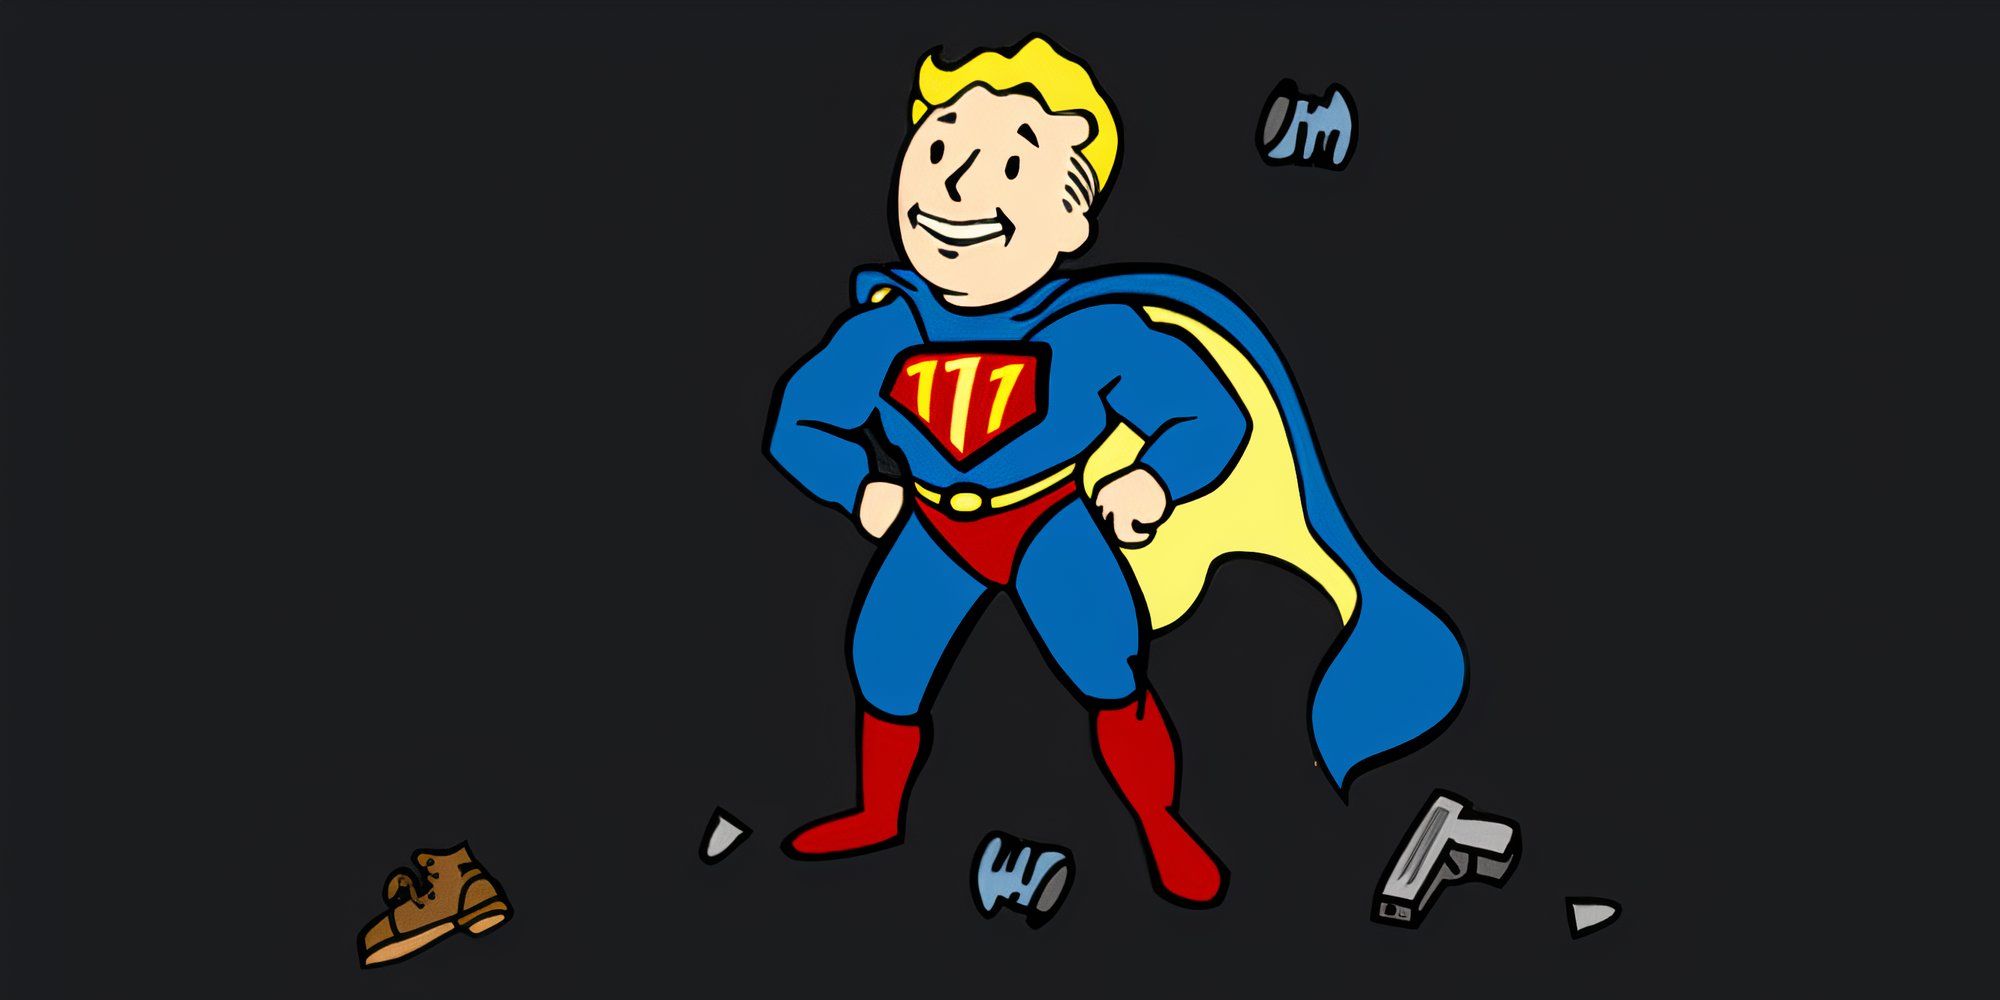 Vault Boy stands in a Superman costume as things bounce off him